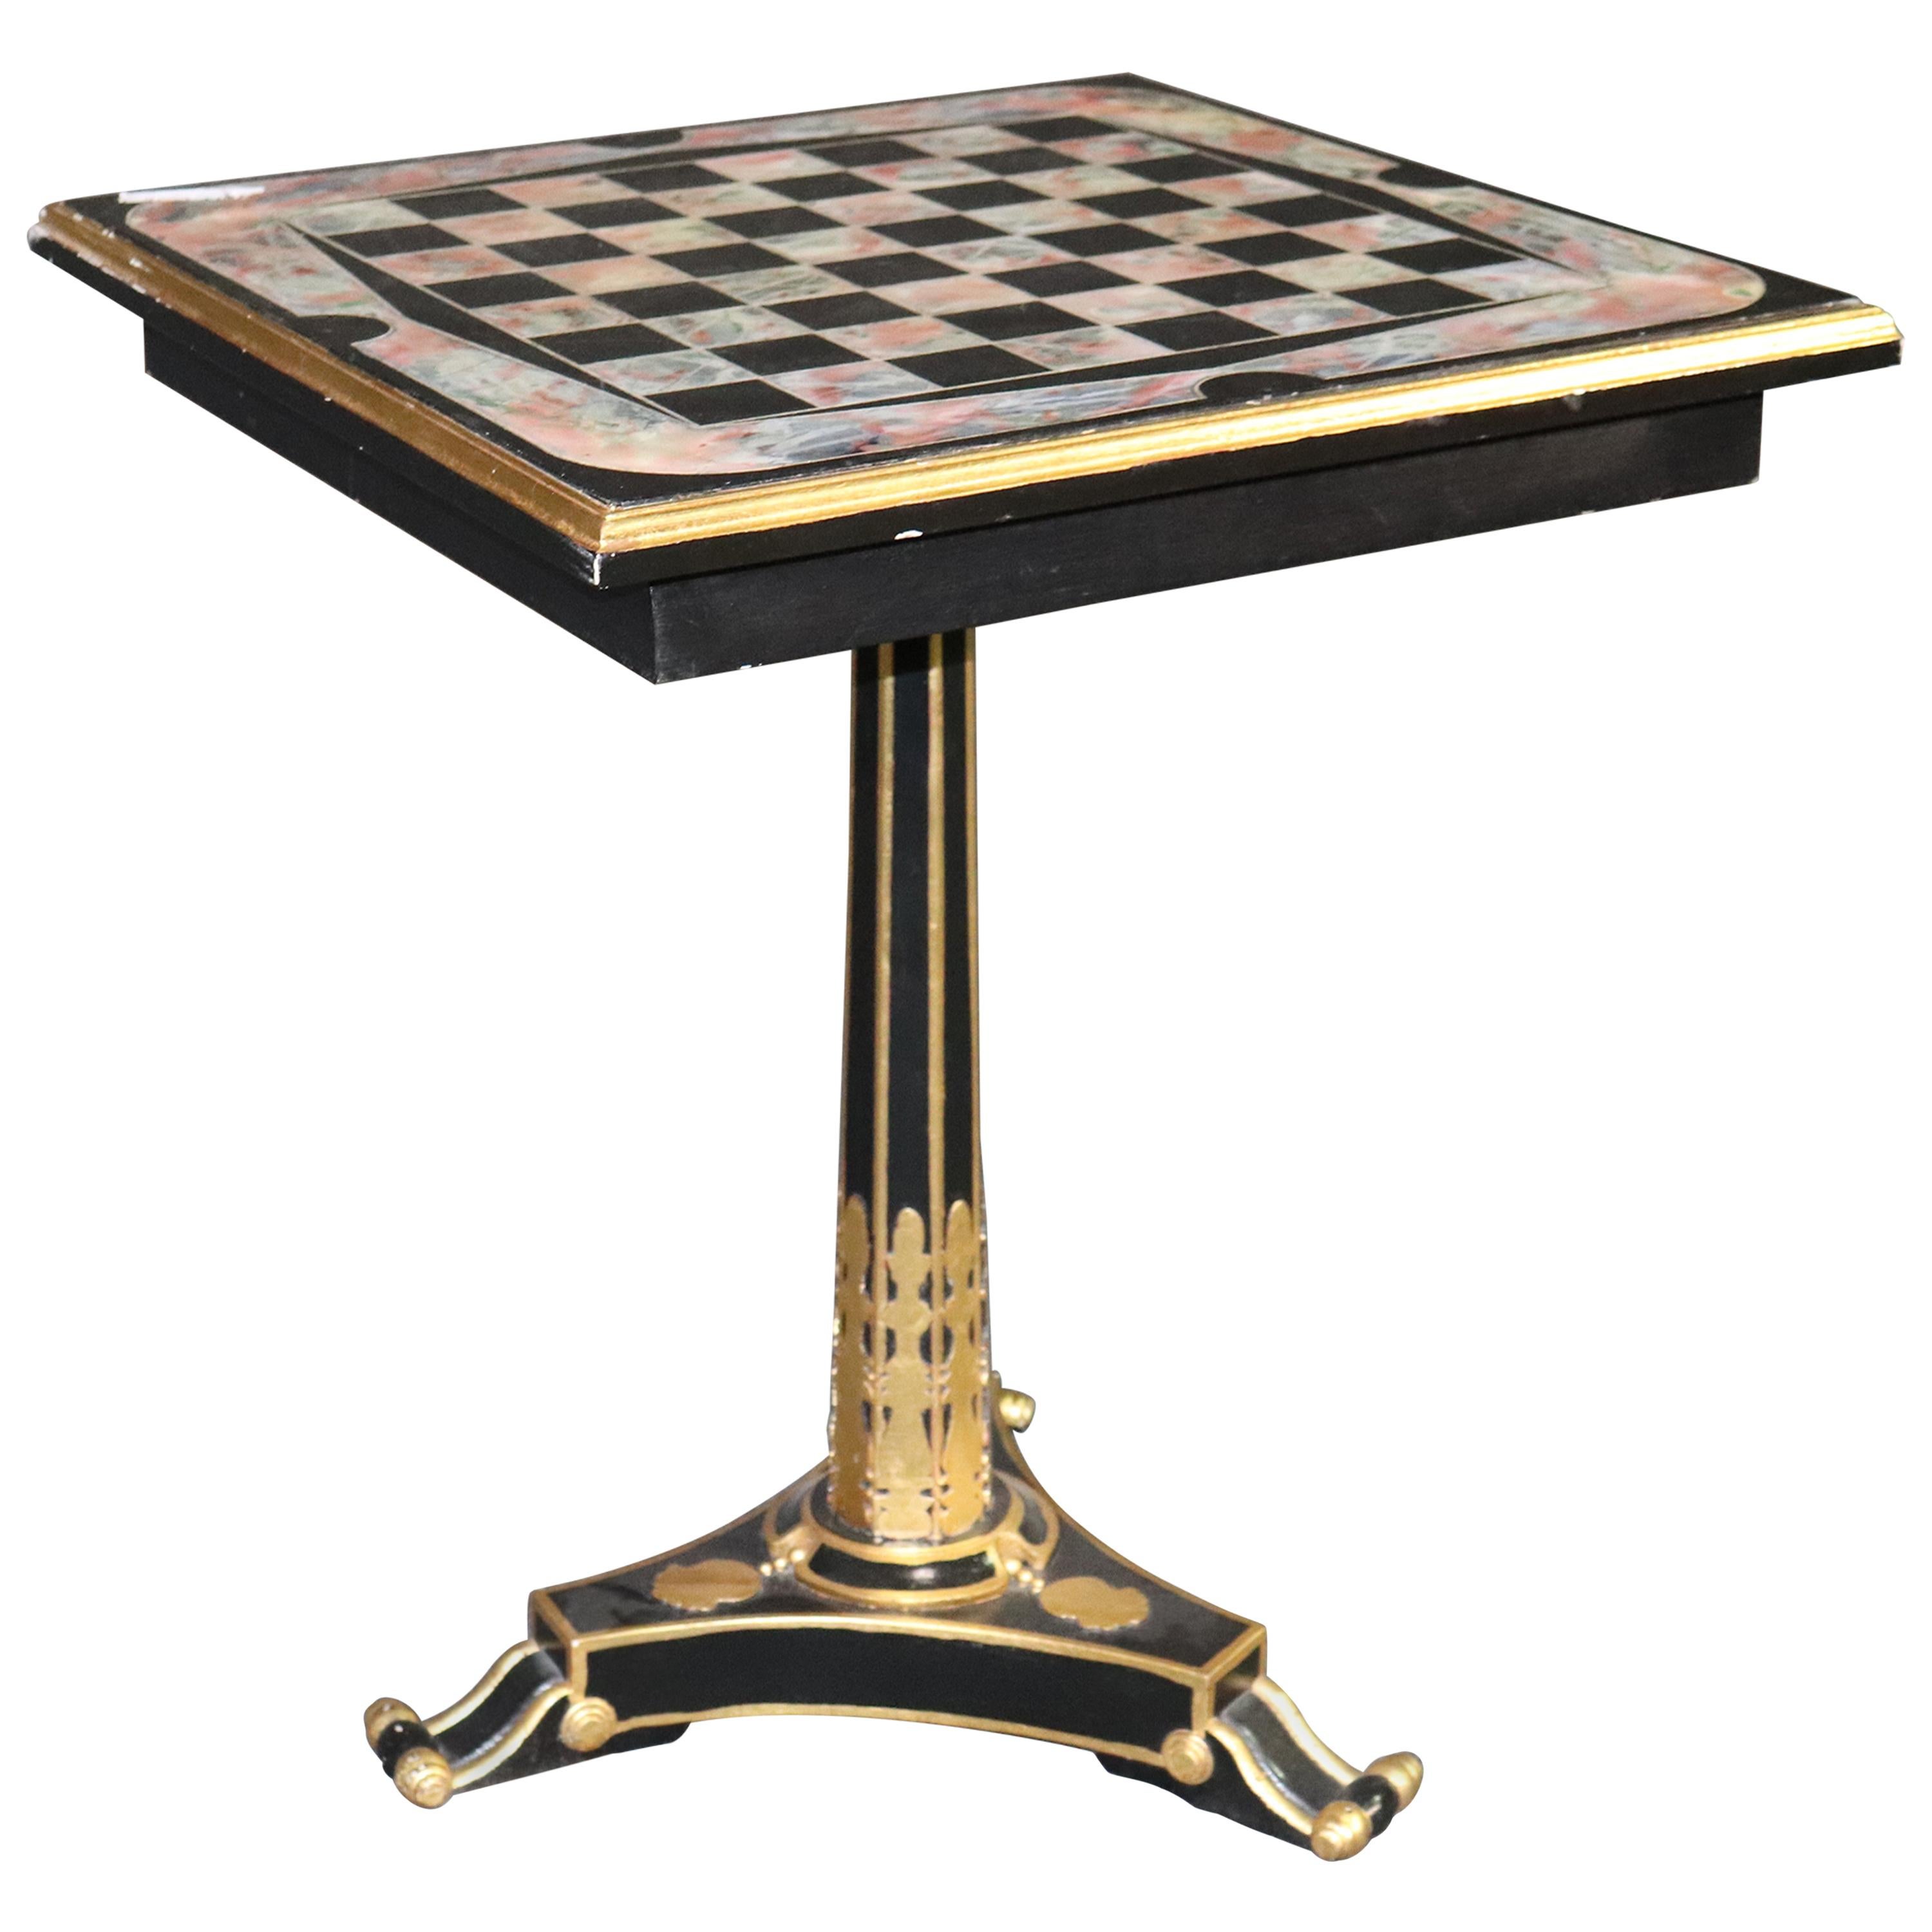 French Empire Style Faux Marble Decorated Games Chess Checkers Table